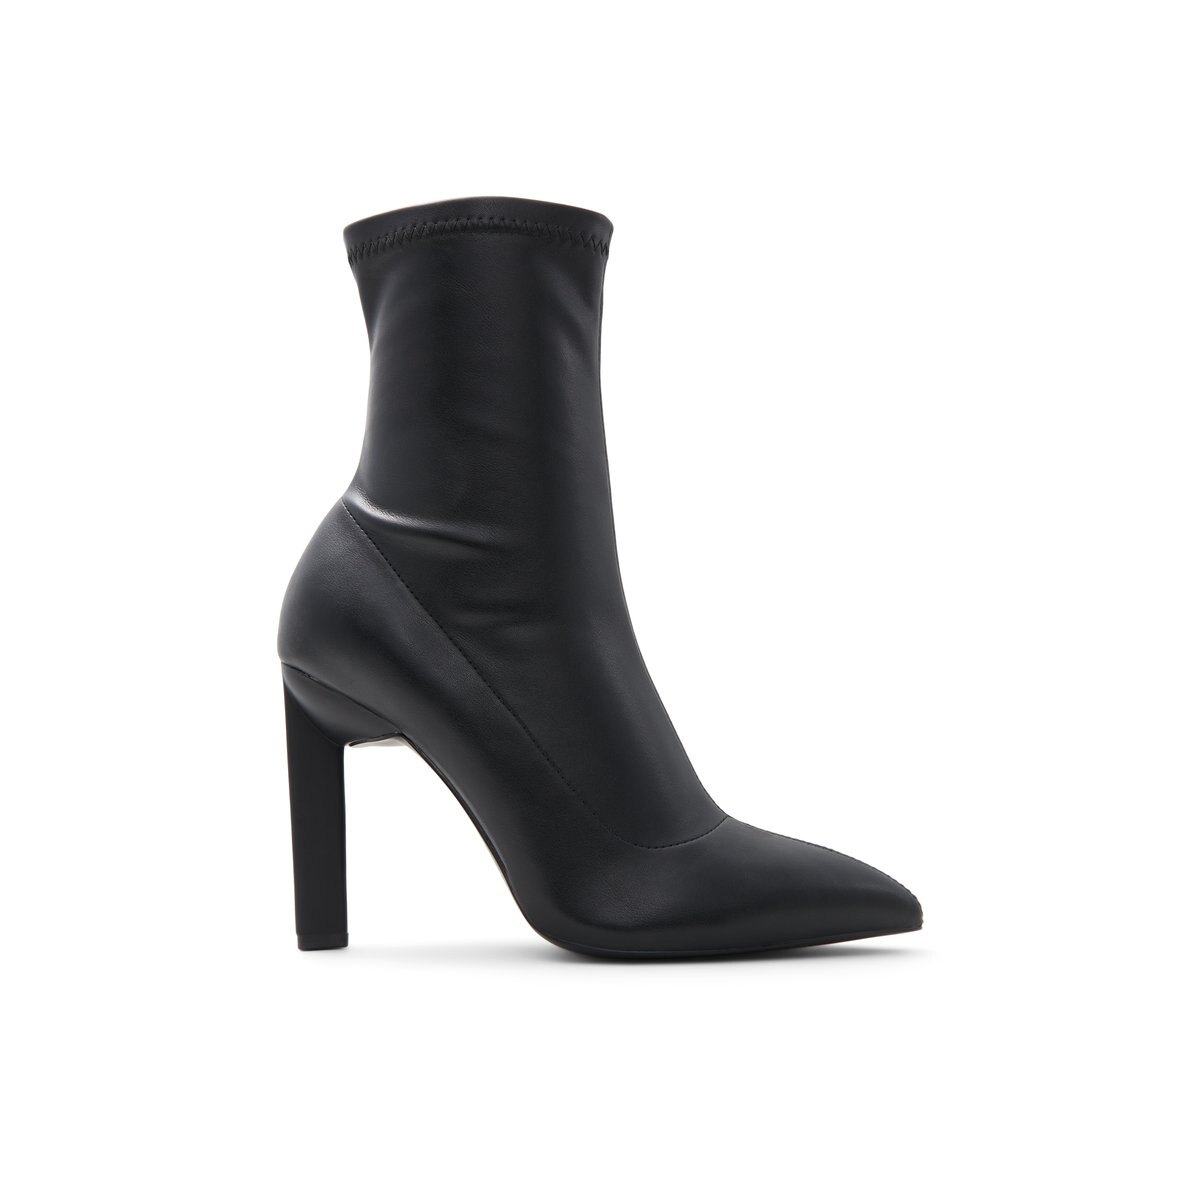 France Black Women's Ankle Boots | Call It Spring Canada